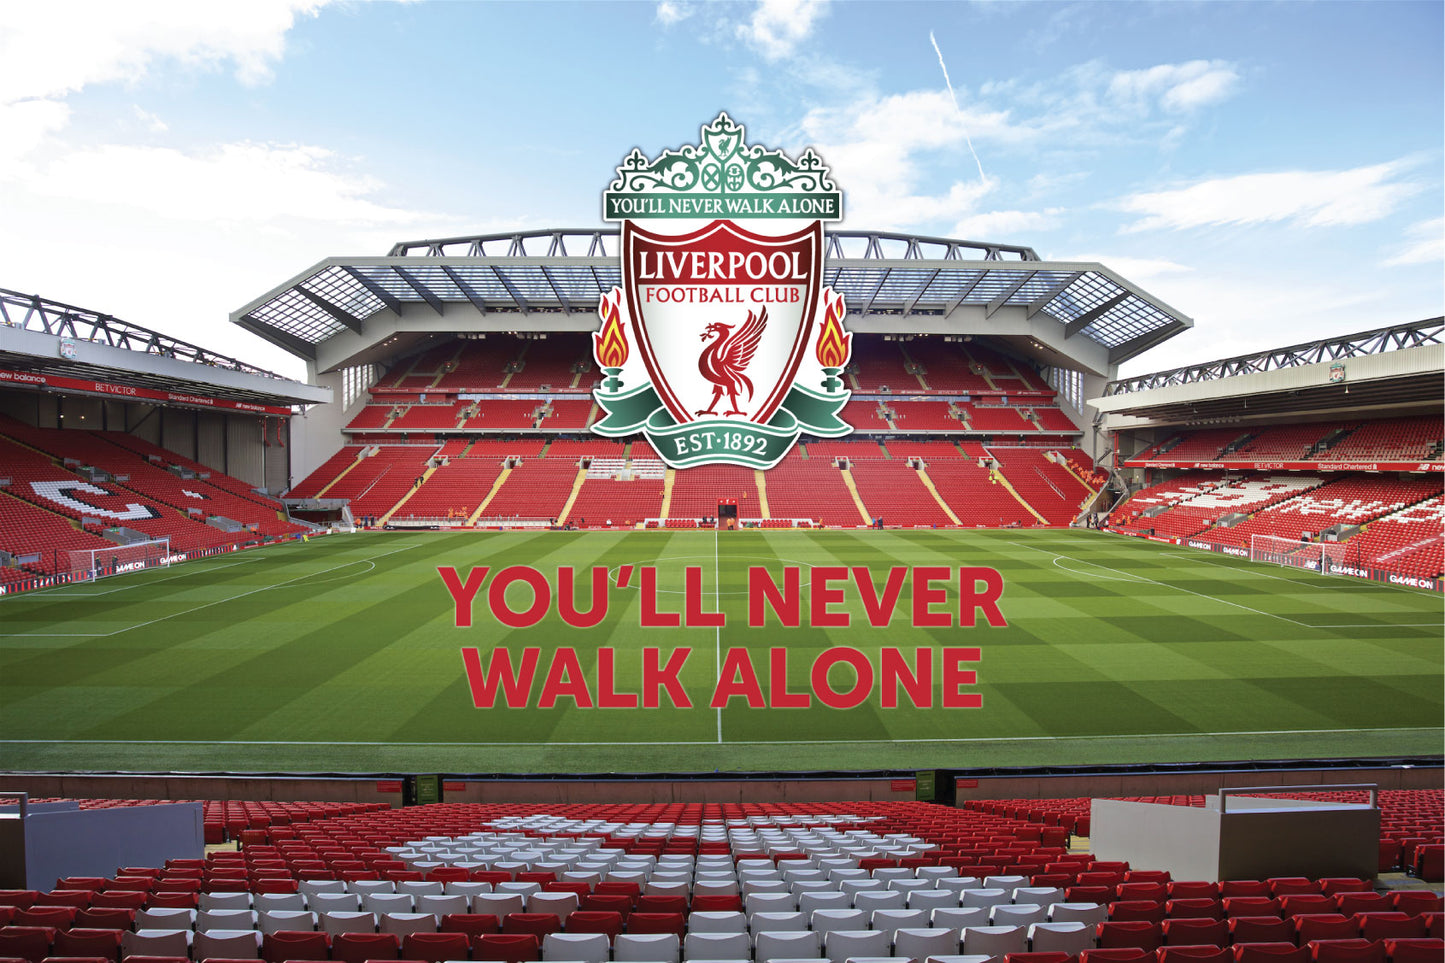 Liverpool Anfield Stadium Full Wall Mural Main Stand Image YNWA Crest